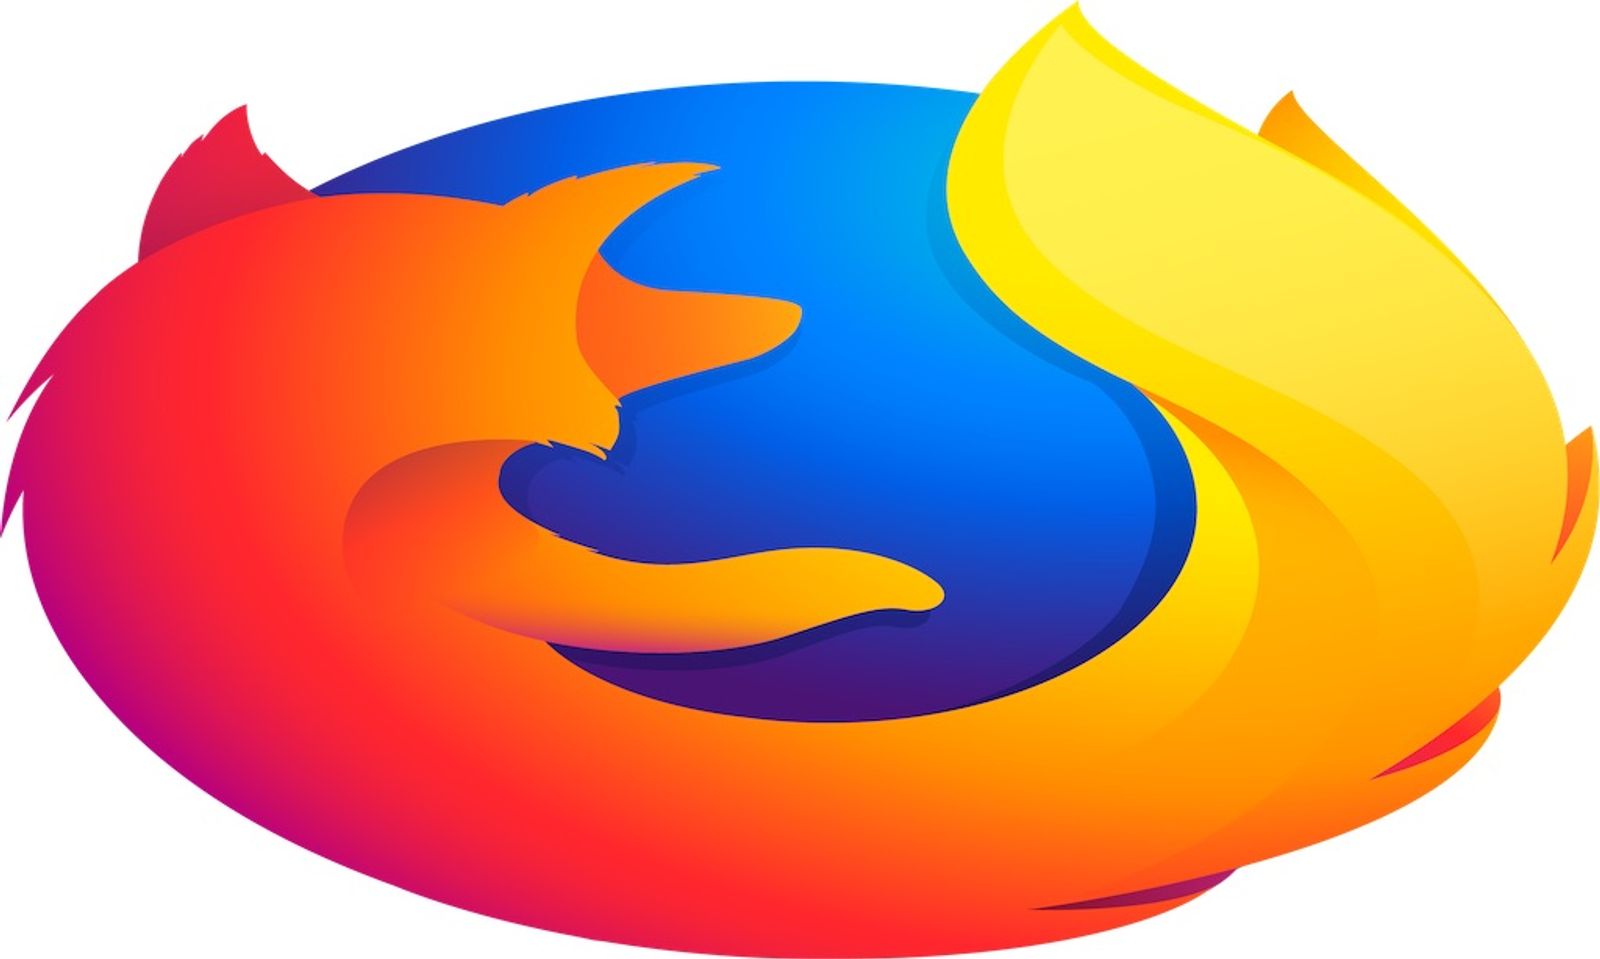 Planned Firefox ‘Super Private’ Mode May Get Around UK Porn Block